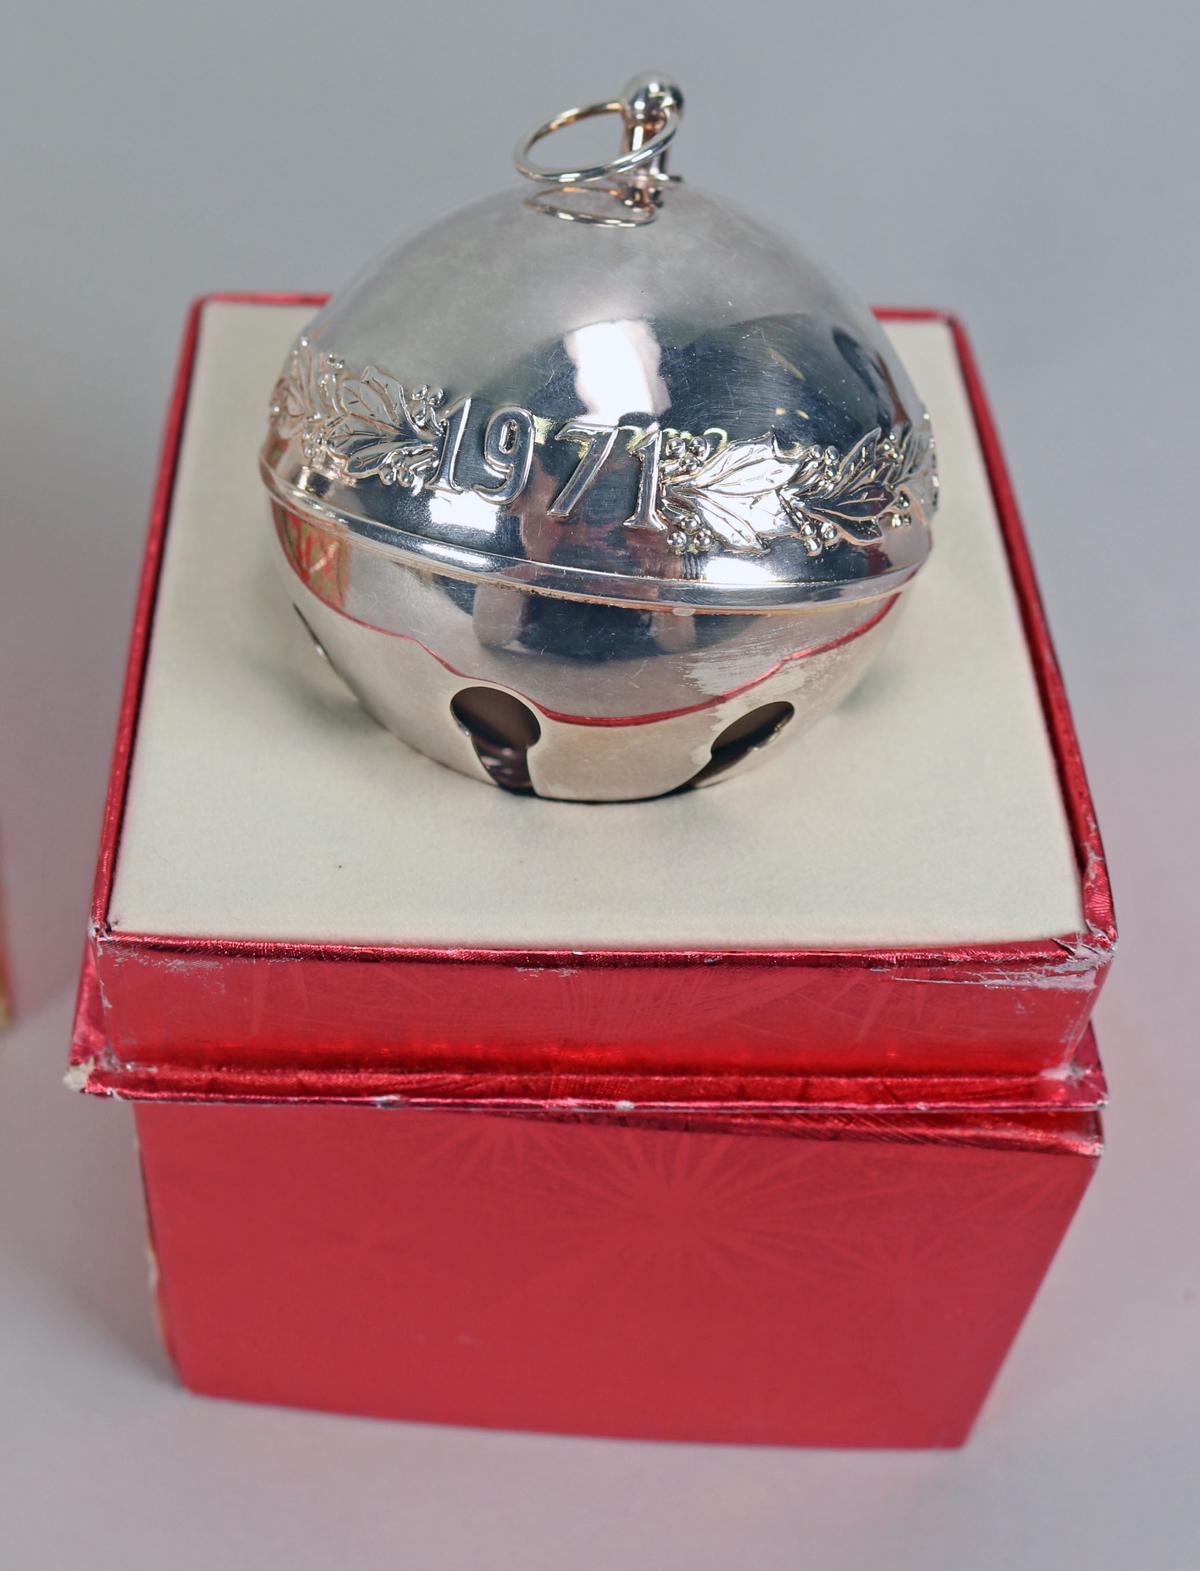 Wallace Silver Bell Ornaments: 1978, 1979, 1971- 1995